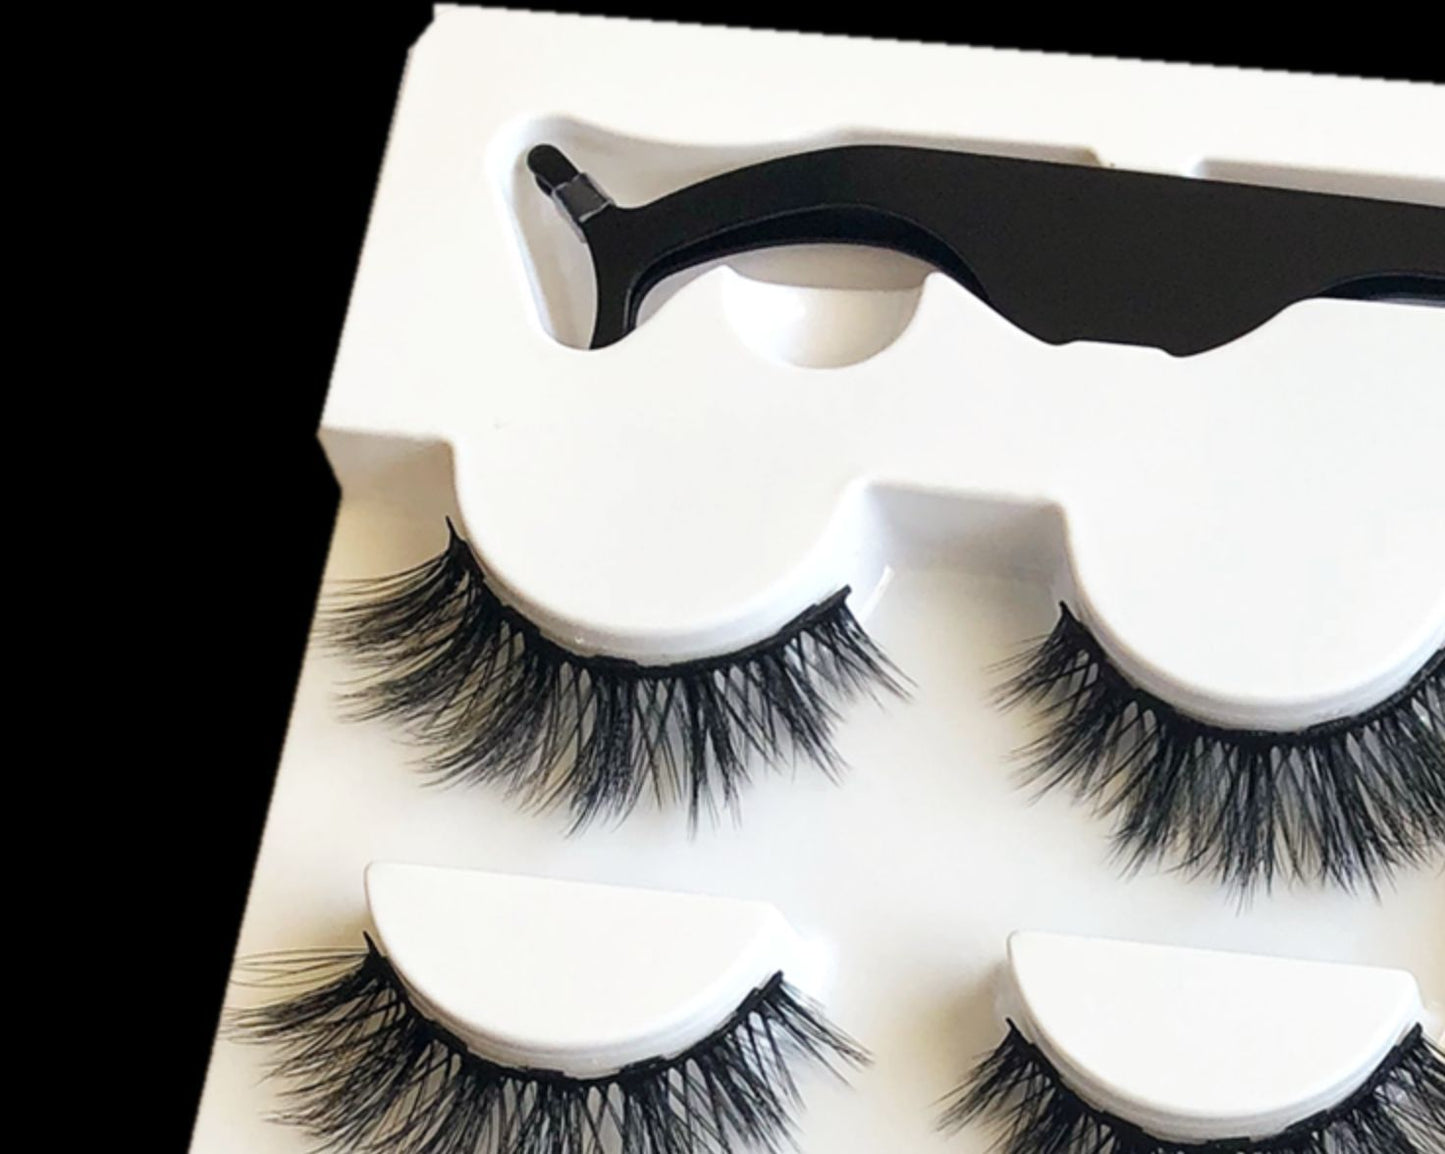 False Eyelashes With Magnets In Fashion, 100% High Quality.